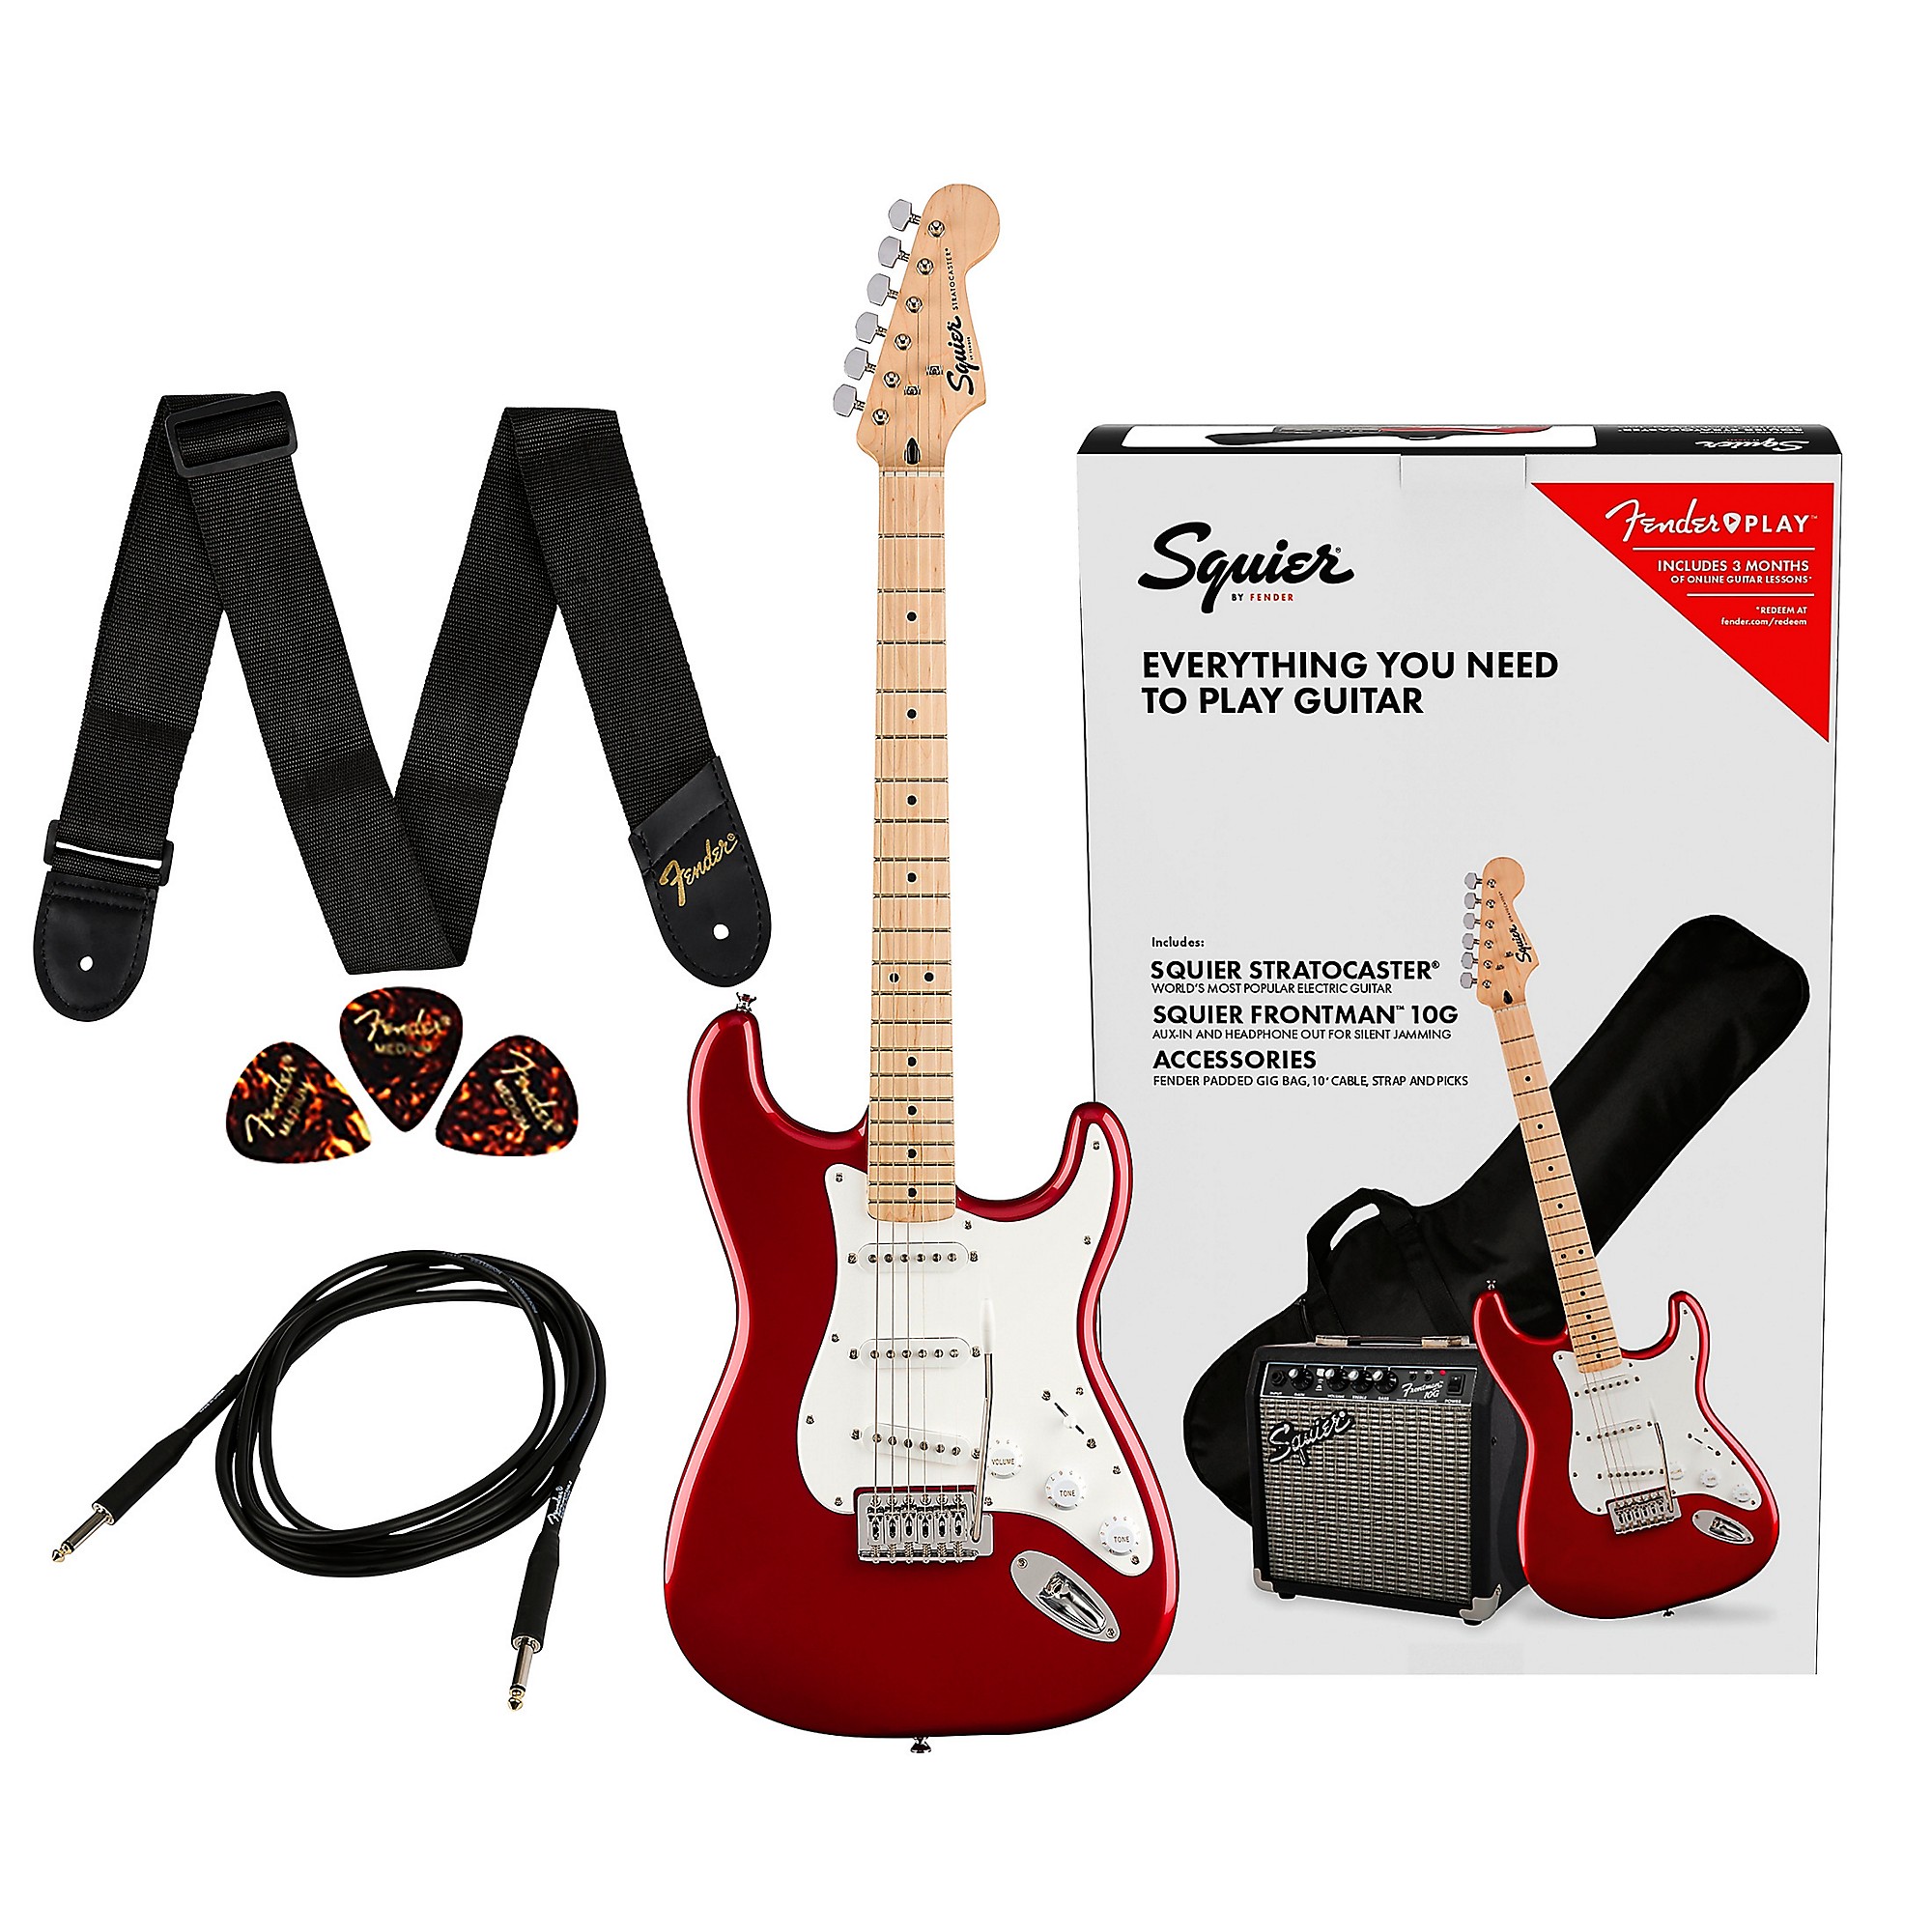 Squier Stratocaster Limited Edition Electric Guitar Pack With